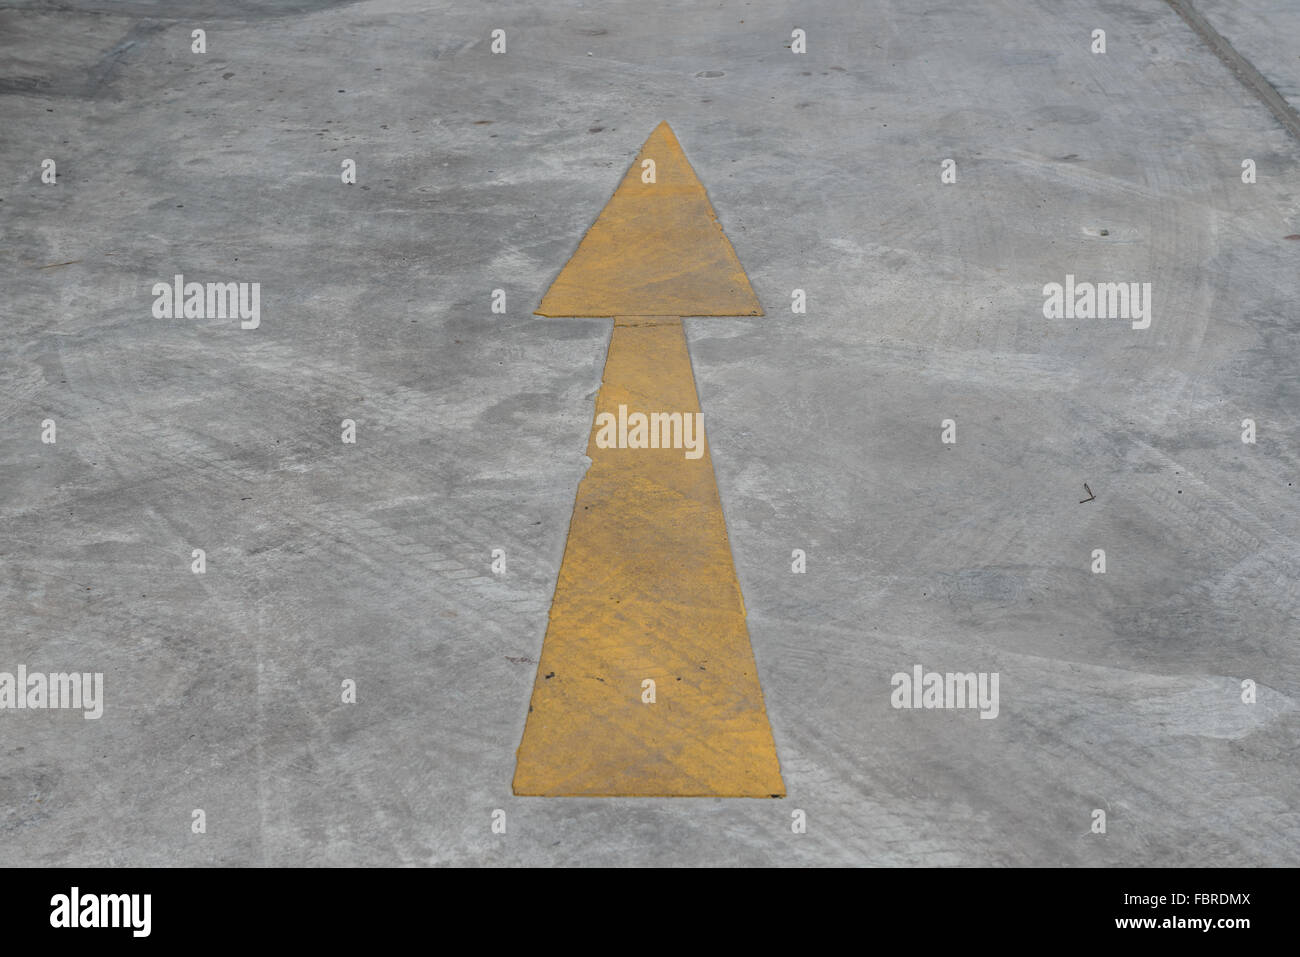 The arrow on a floor can tell you a right way for entrance or exit. Stock Photo